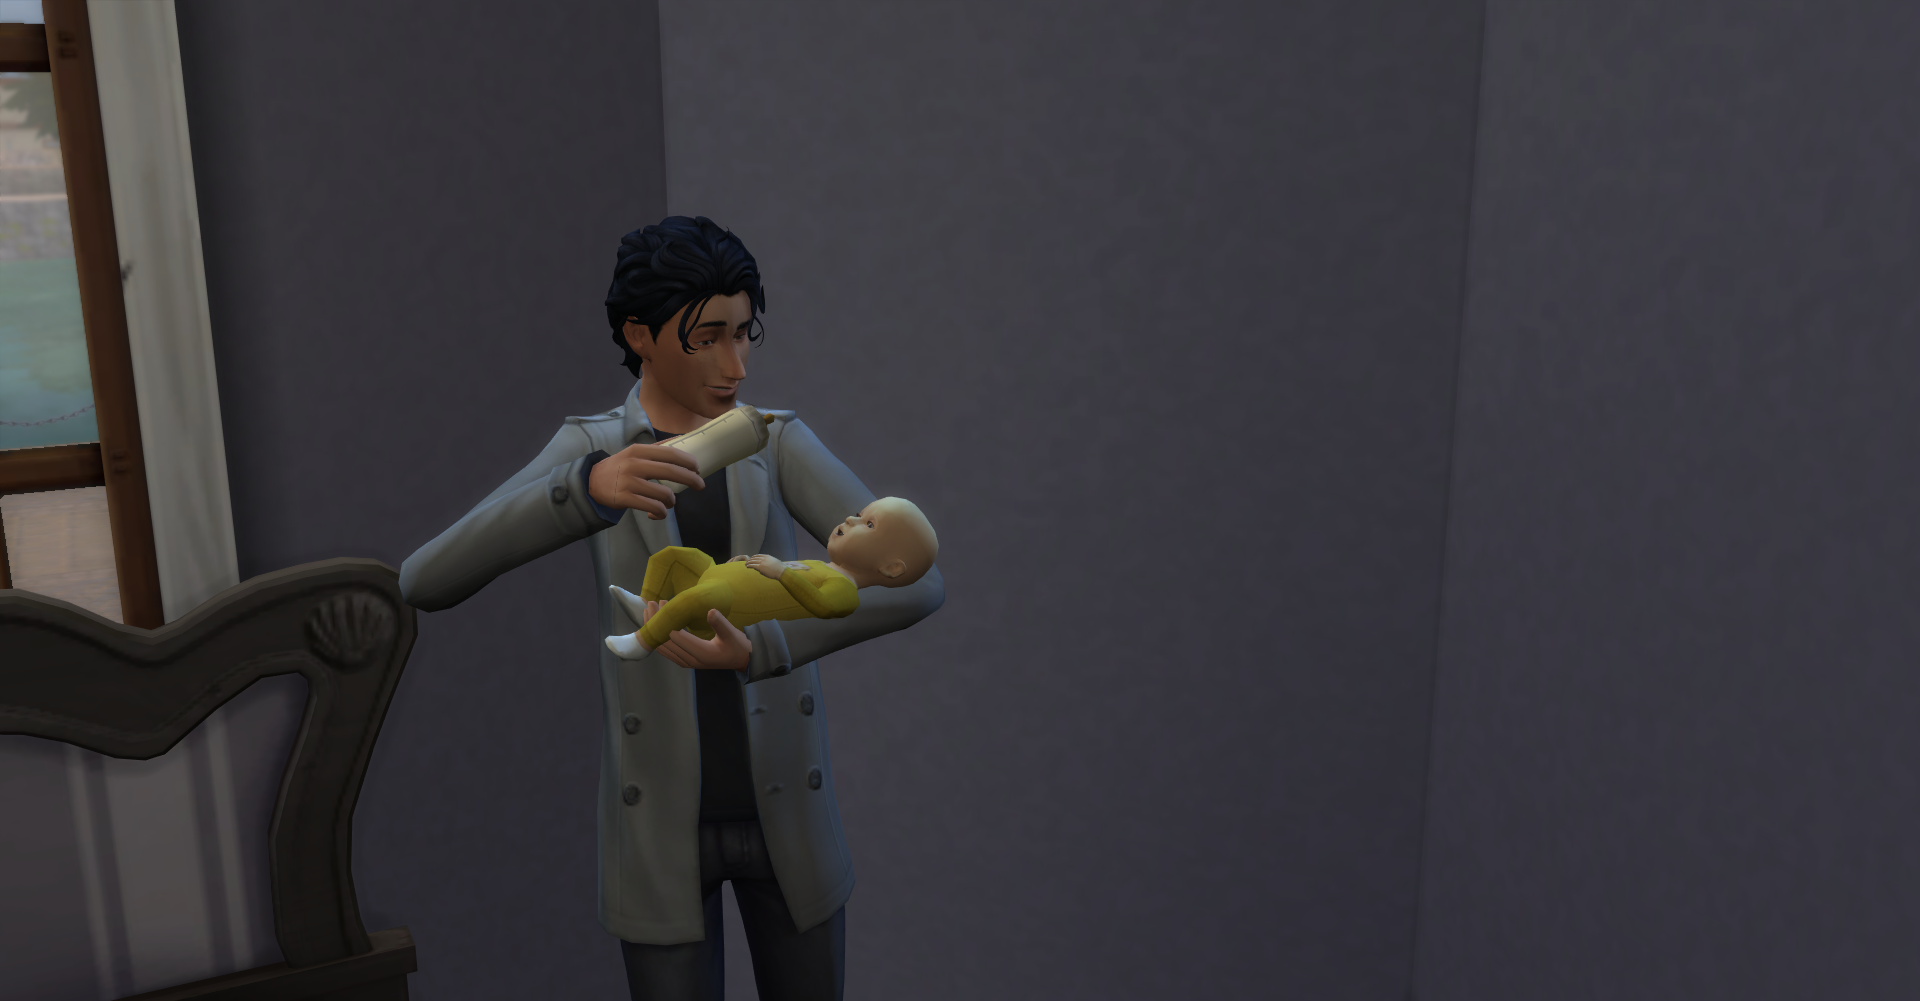 100 baby challenge (masculin) - Page 2 6wz5